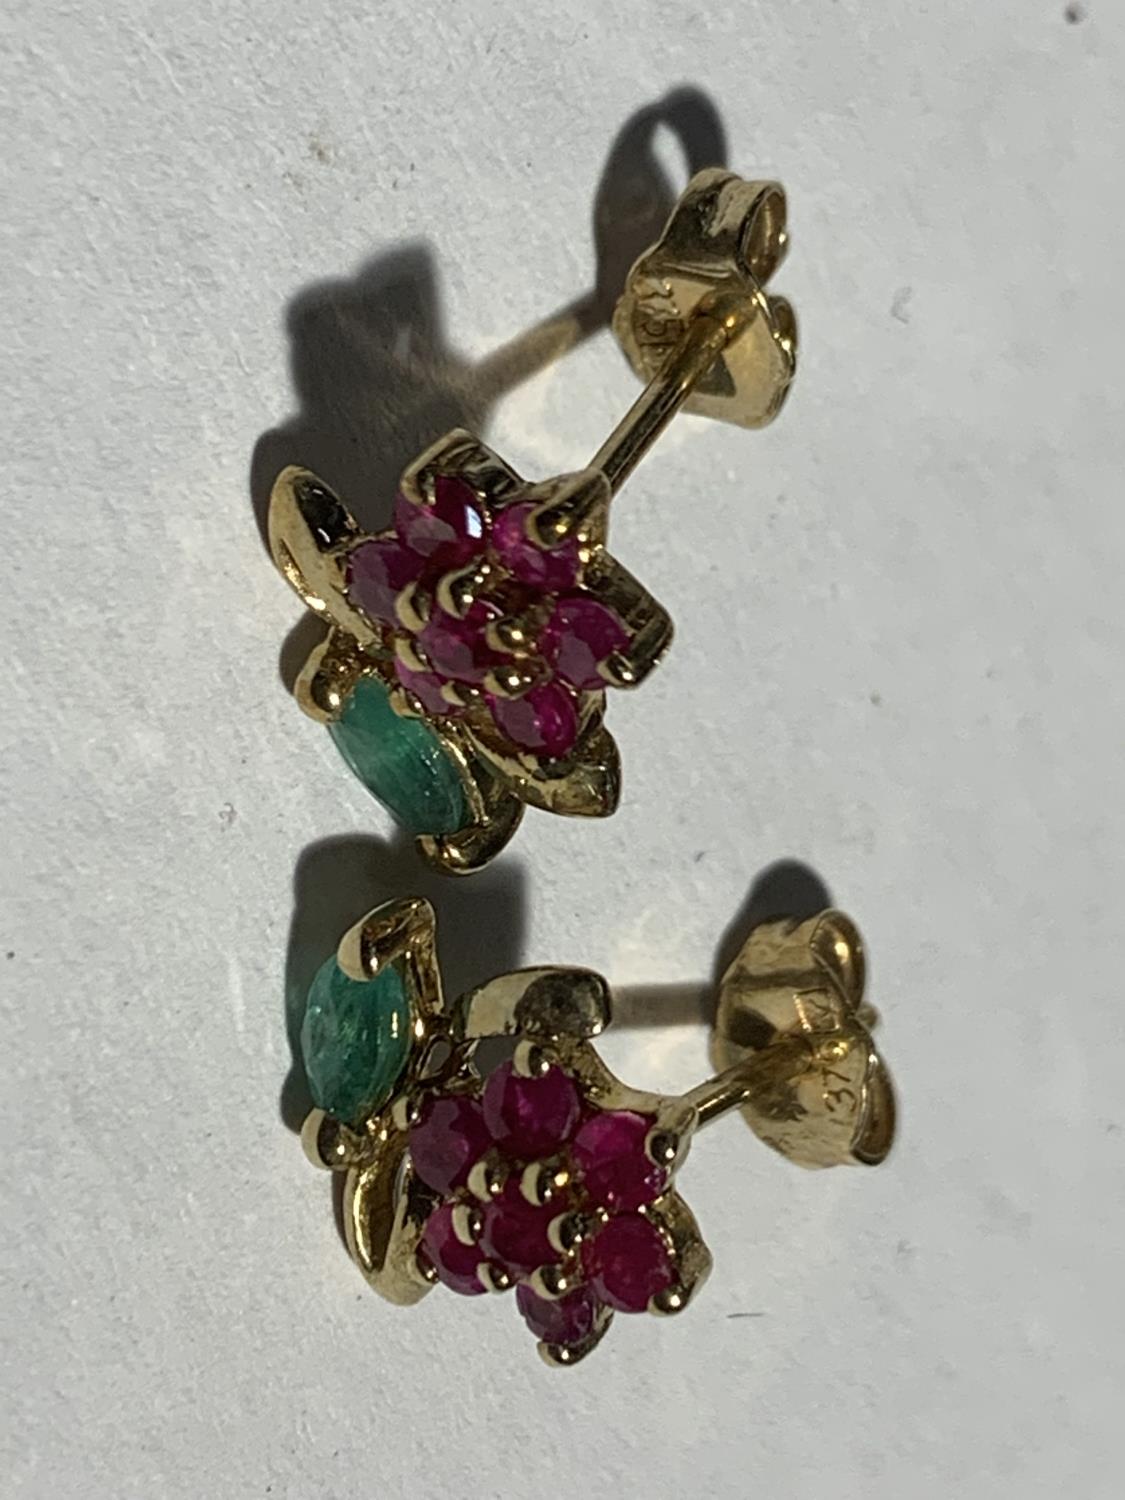 TWO PAIRS OF 9 CARAT GOLD FLOWER DESIGN EARRINGS GROSS WEIGHT 4.6 GRAMS - Image 3 of 3